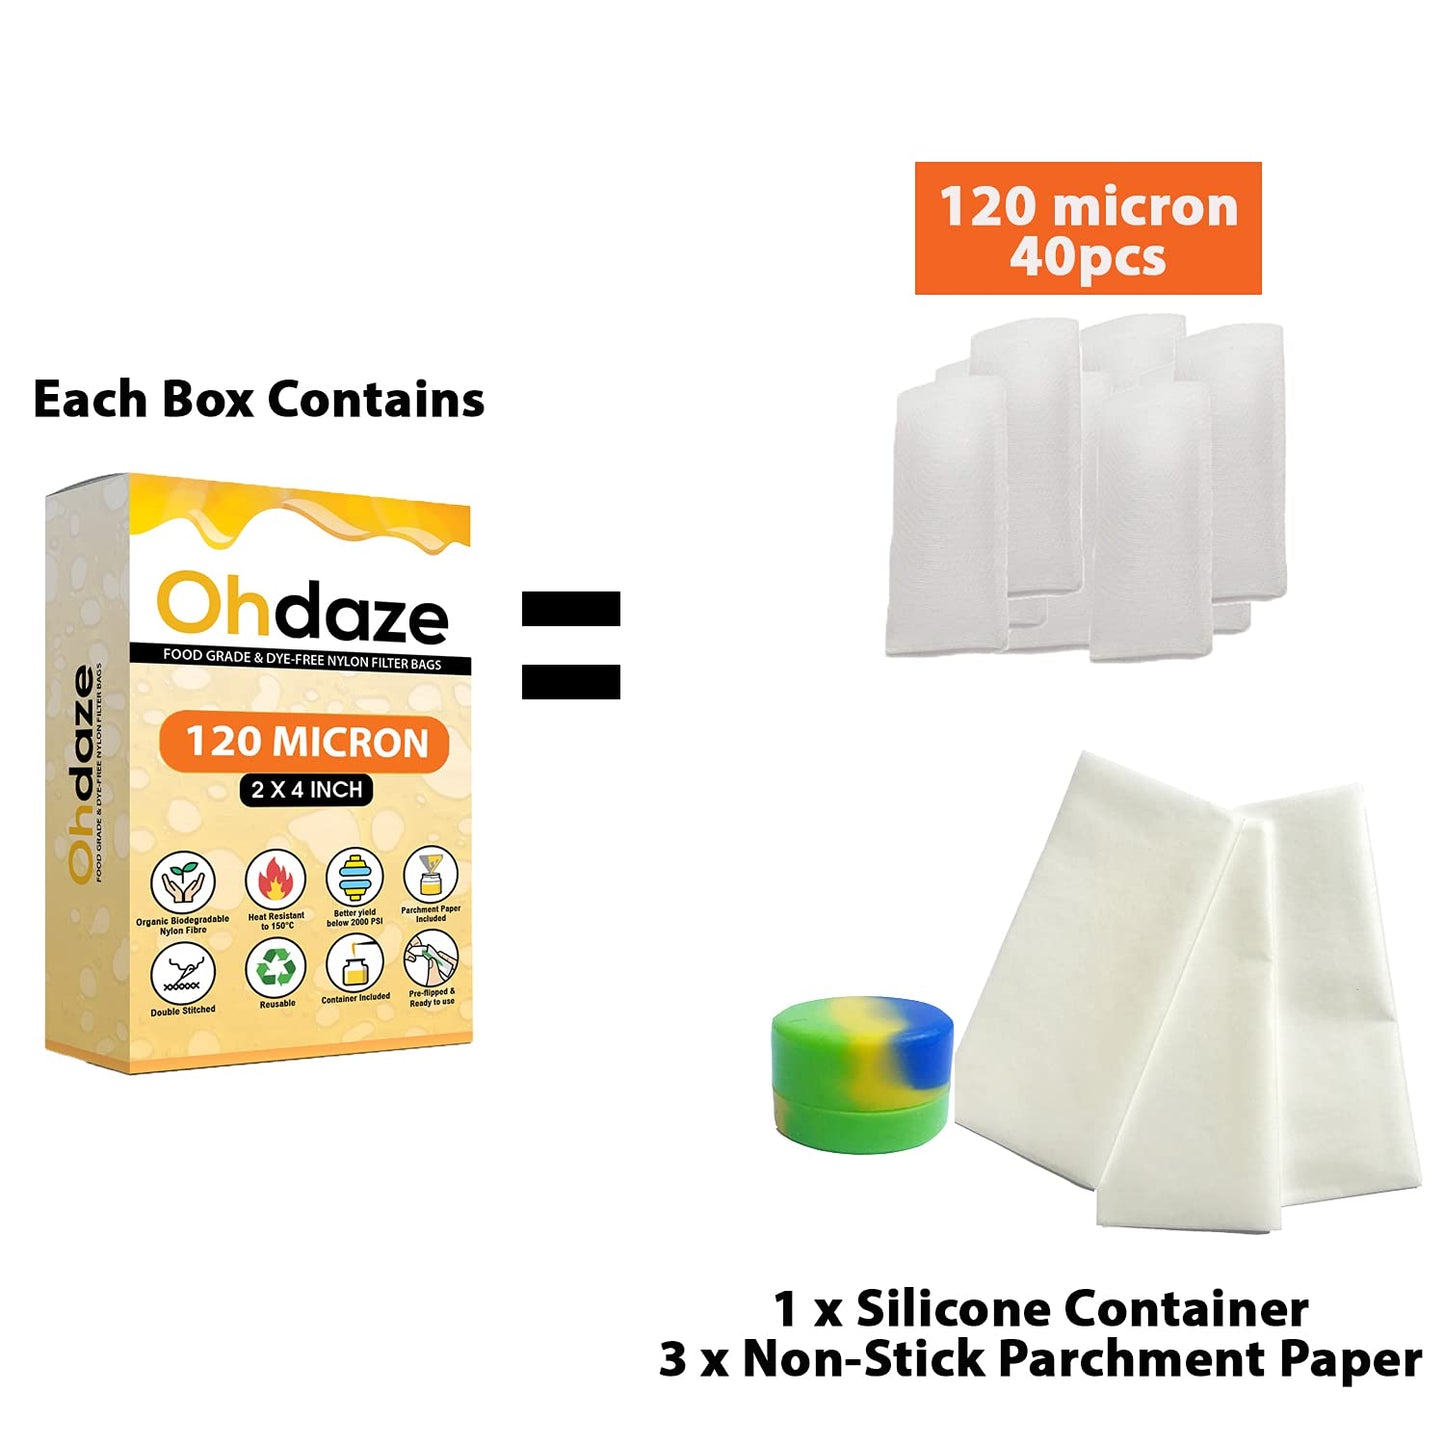 40 x rosin press bags in total that are rated at 120 micron. Accompanying these 2 inch x 4 inch micron press bags, the pack also includes 3 x Non-Stick Parchment papers and 1 x Wax container so that every drop of pure rosin can be easily collected stored.